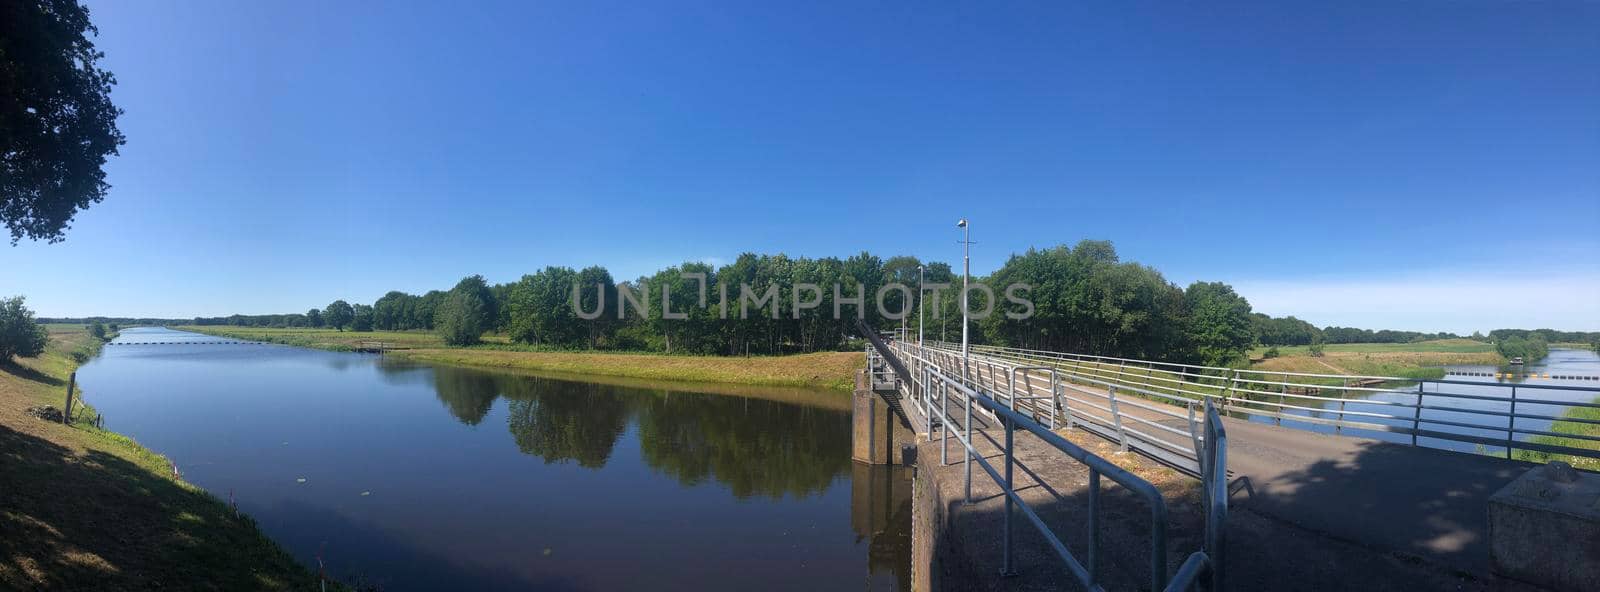 Panorama from a bridge over the river Vecht in Junne by traveltelly